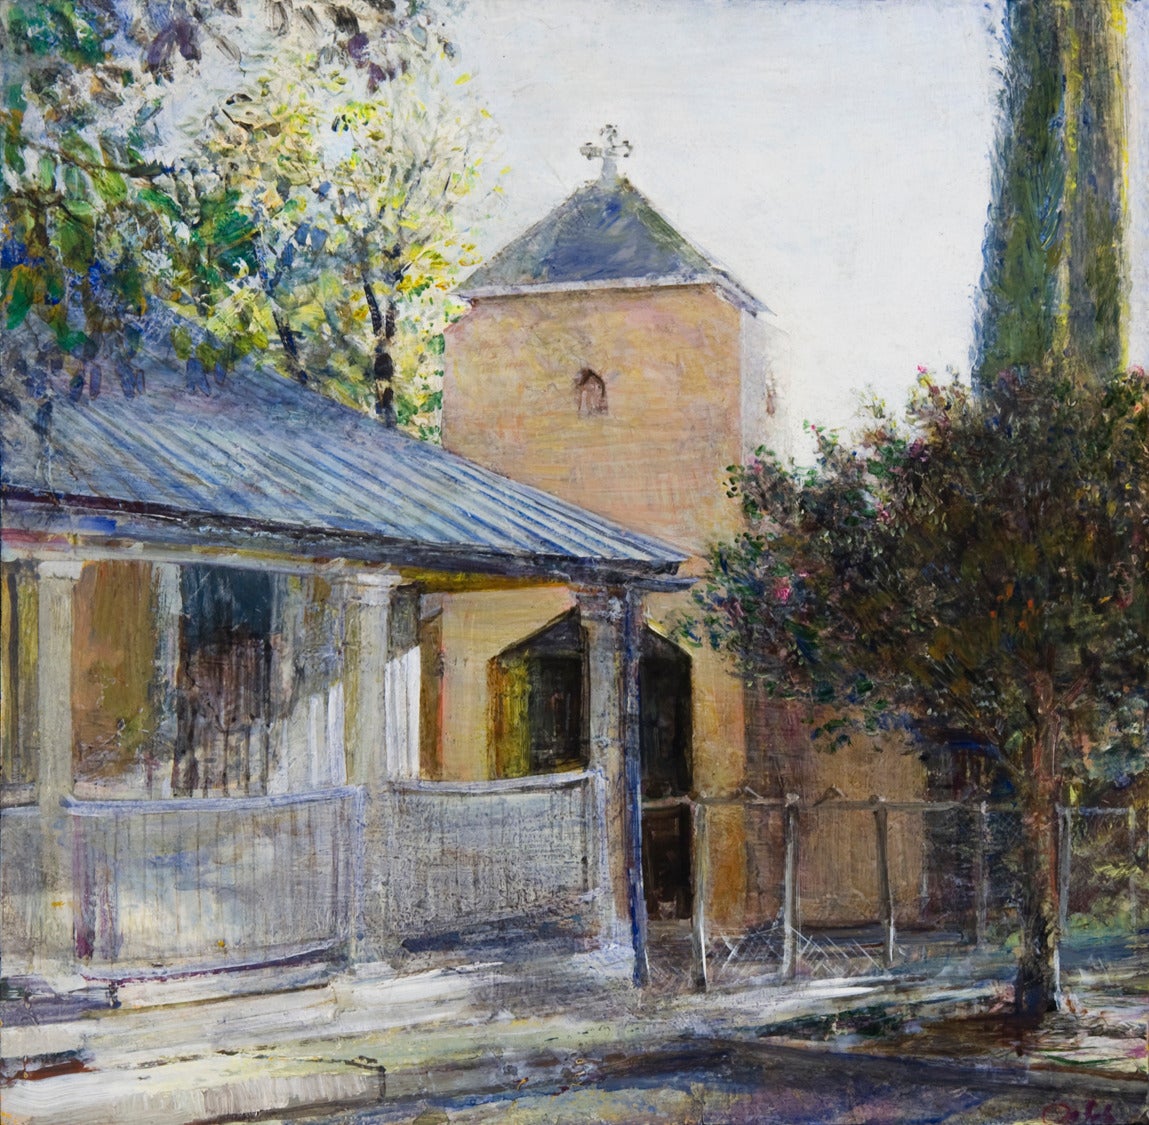 Chapel of the Miracles - Painting by John Cobb